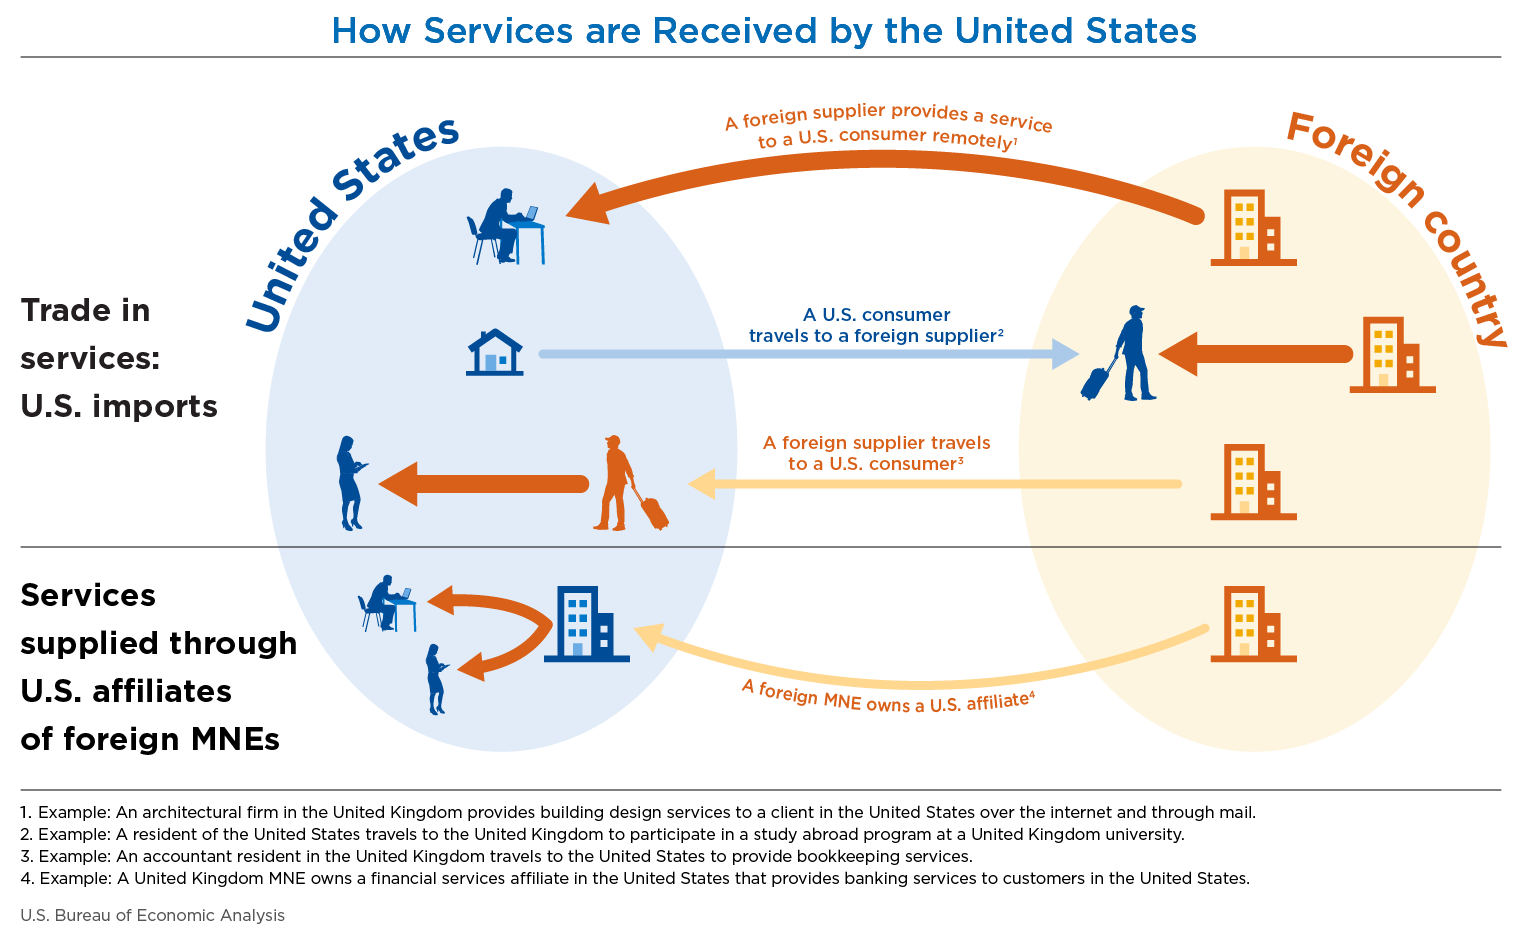 How Services are received by the United States